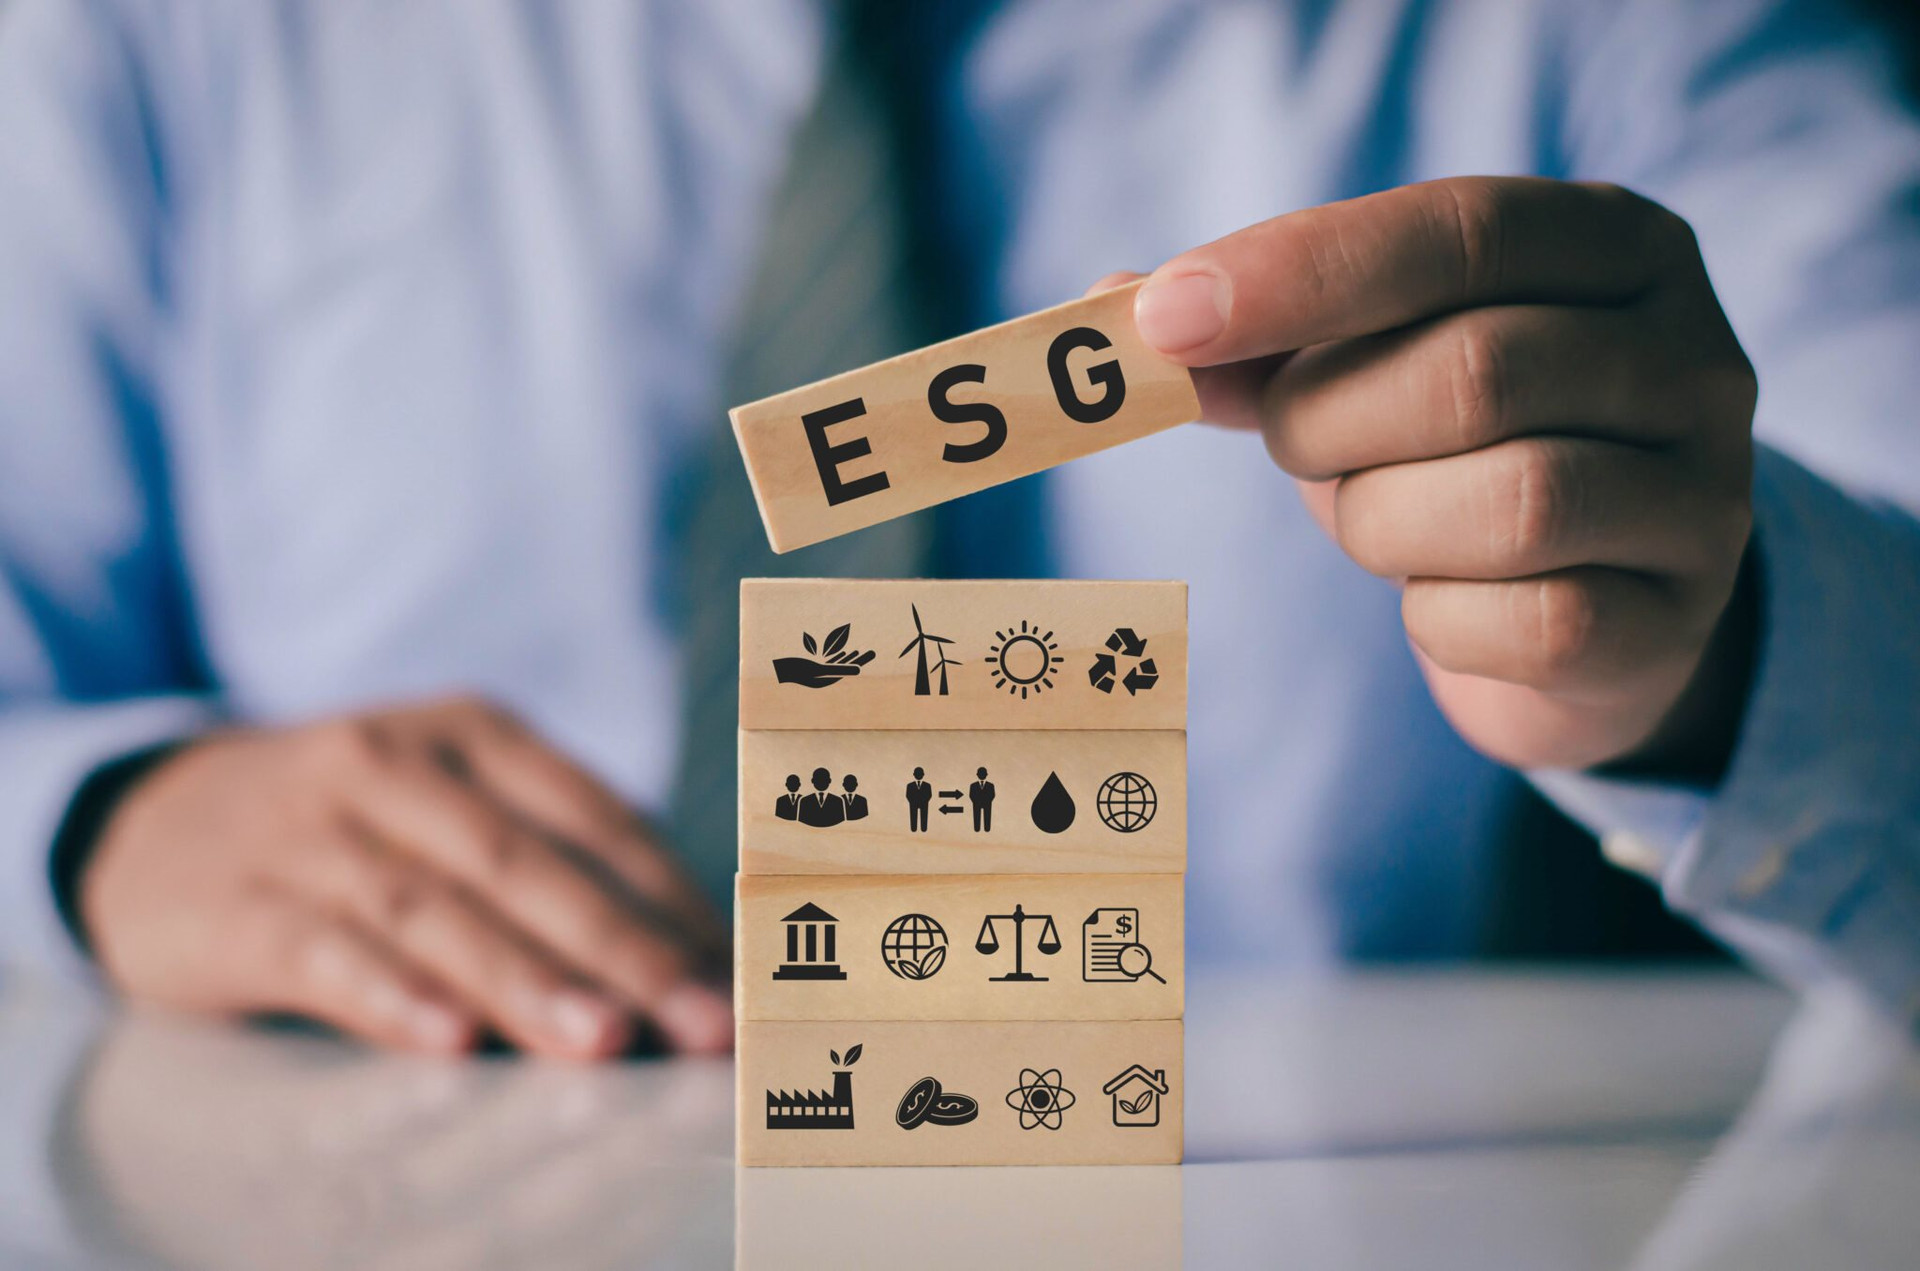 businessman-with-wooden-block-hand-esg-icon-concept-environmental-social-governance-sustainable-ethical-business-network-connection-green-background-2048x1356.jpg